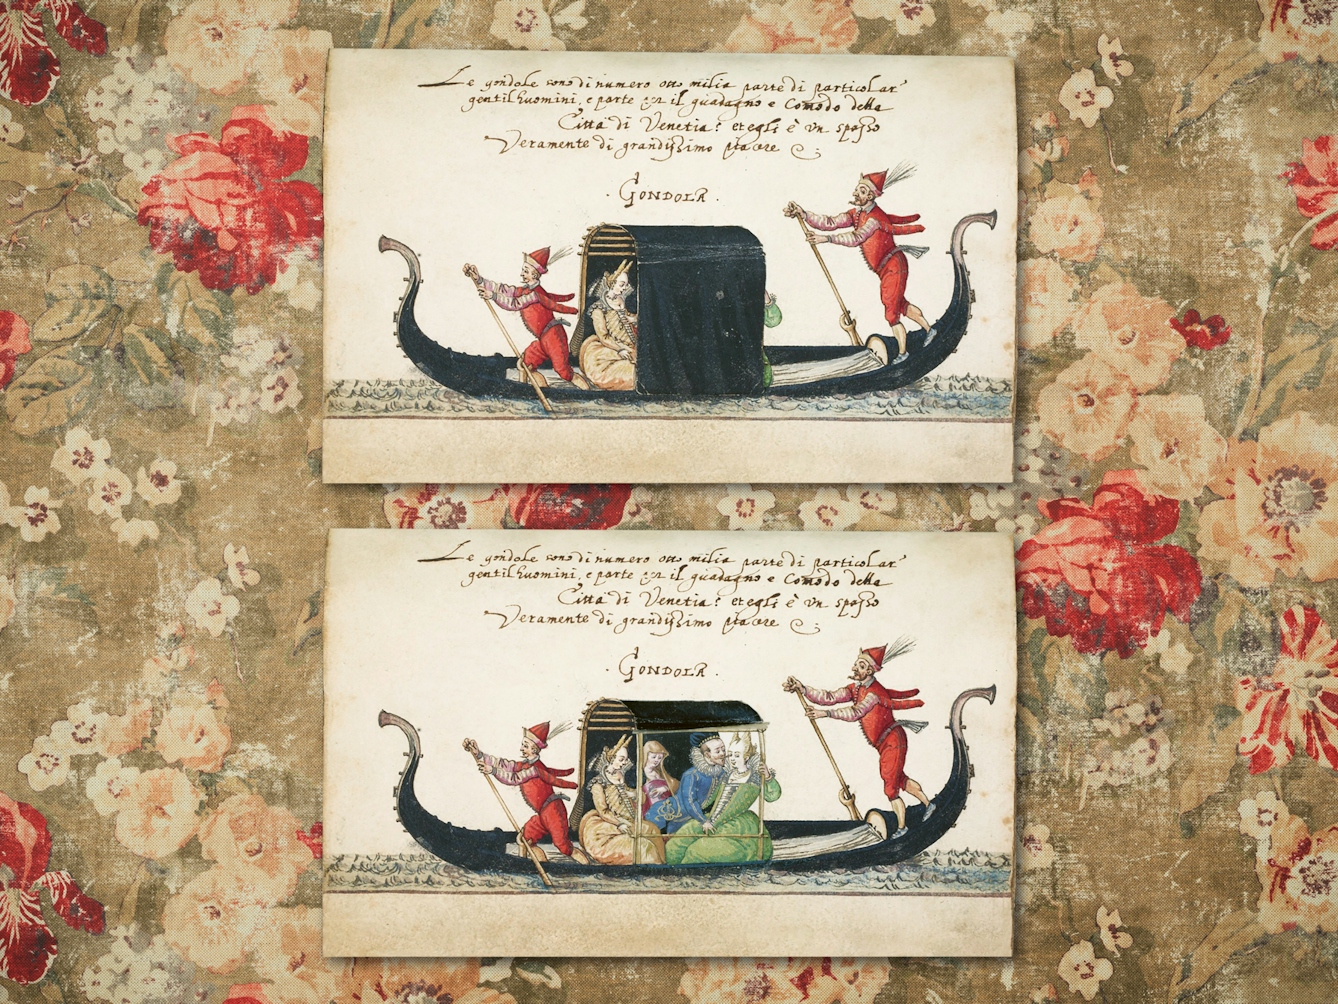 Digital composite image showing a floral renaissance worn fabric background. Resting on top of the background are two prints showing a gondola on the water. In the top image the gondola cabin is covered over. In the bottom image the cover has been raised to reveal a pair of hiding lovers within.